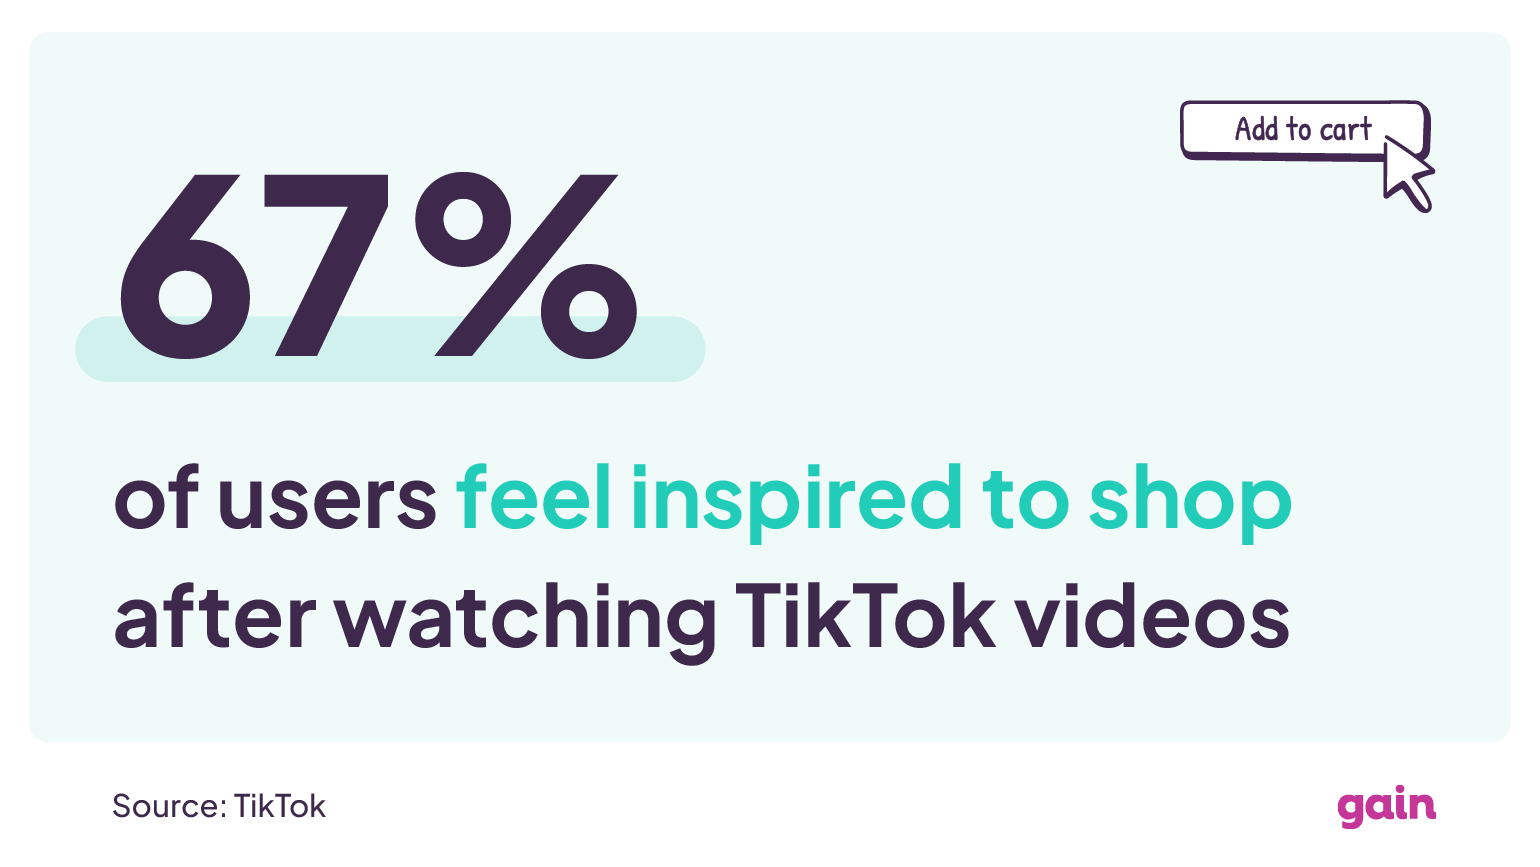 an image showing statistics related to TikTok videos